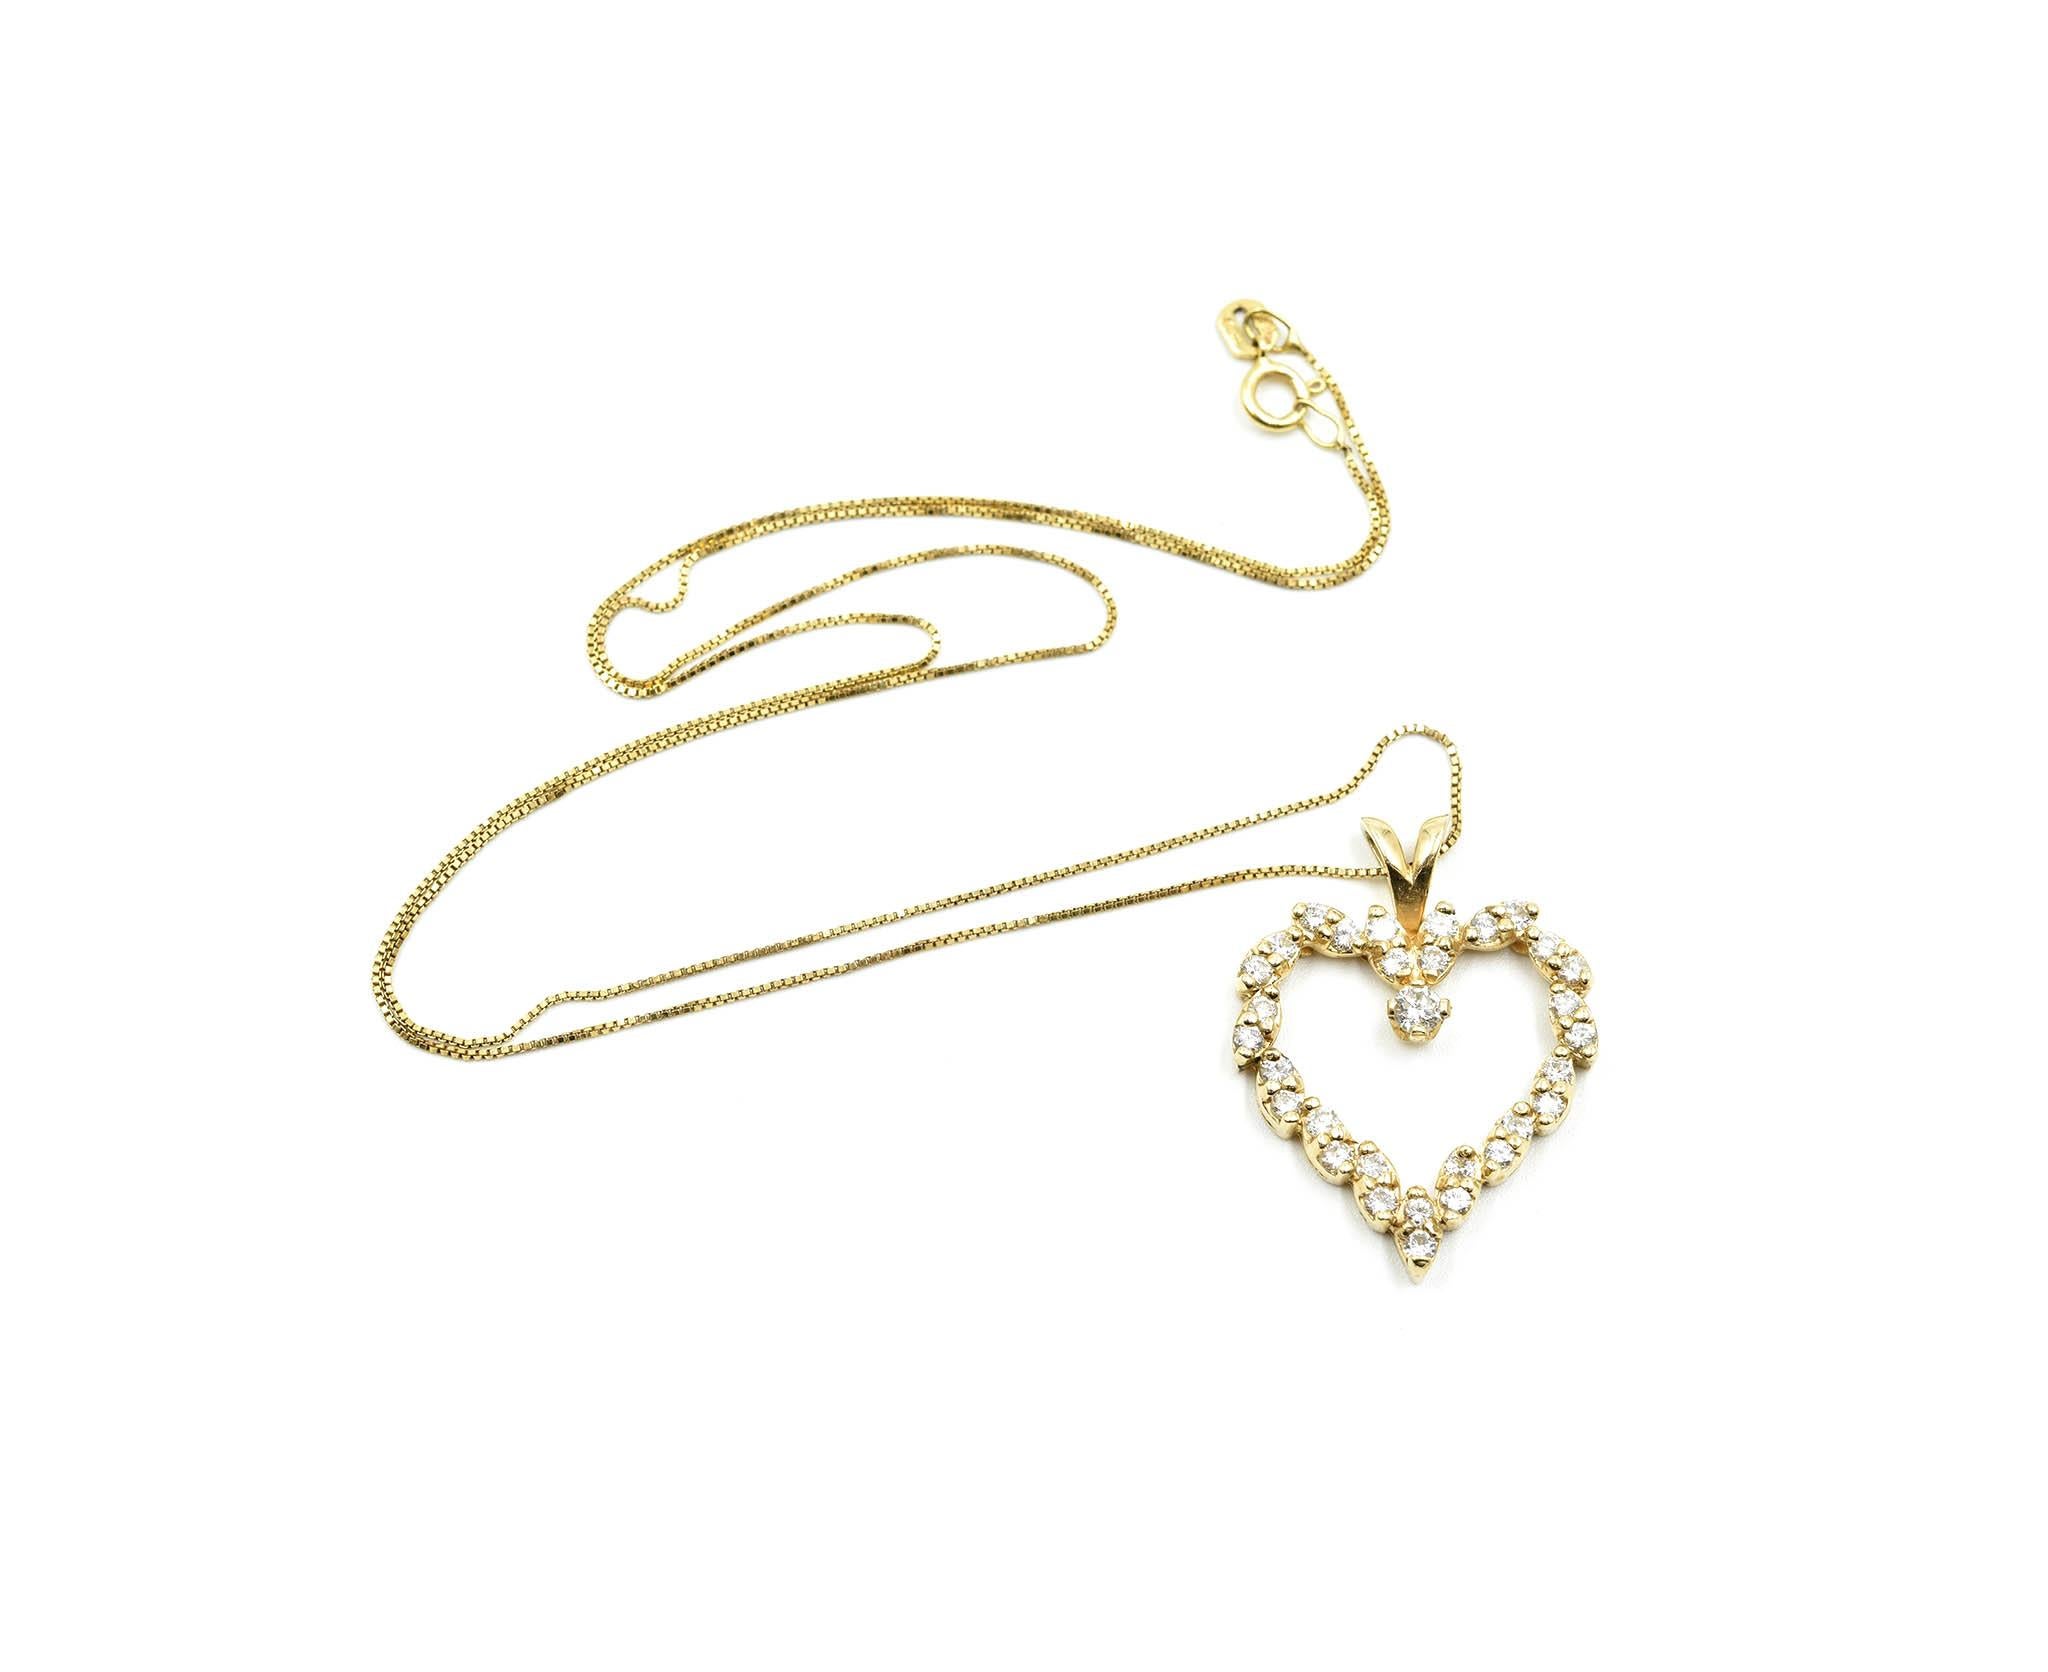 Designer: custom design
Material: 14k yellow gold
Diamonds: 33 round brilliant cut diamonds = 1.25 carat total weight
Color: H
Clarity: SI1
Dimensions: heart pendant measure 1-inch long and 7/8-inch wide, necklace is 18-inch long
Weight: 4.74 grams
